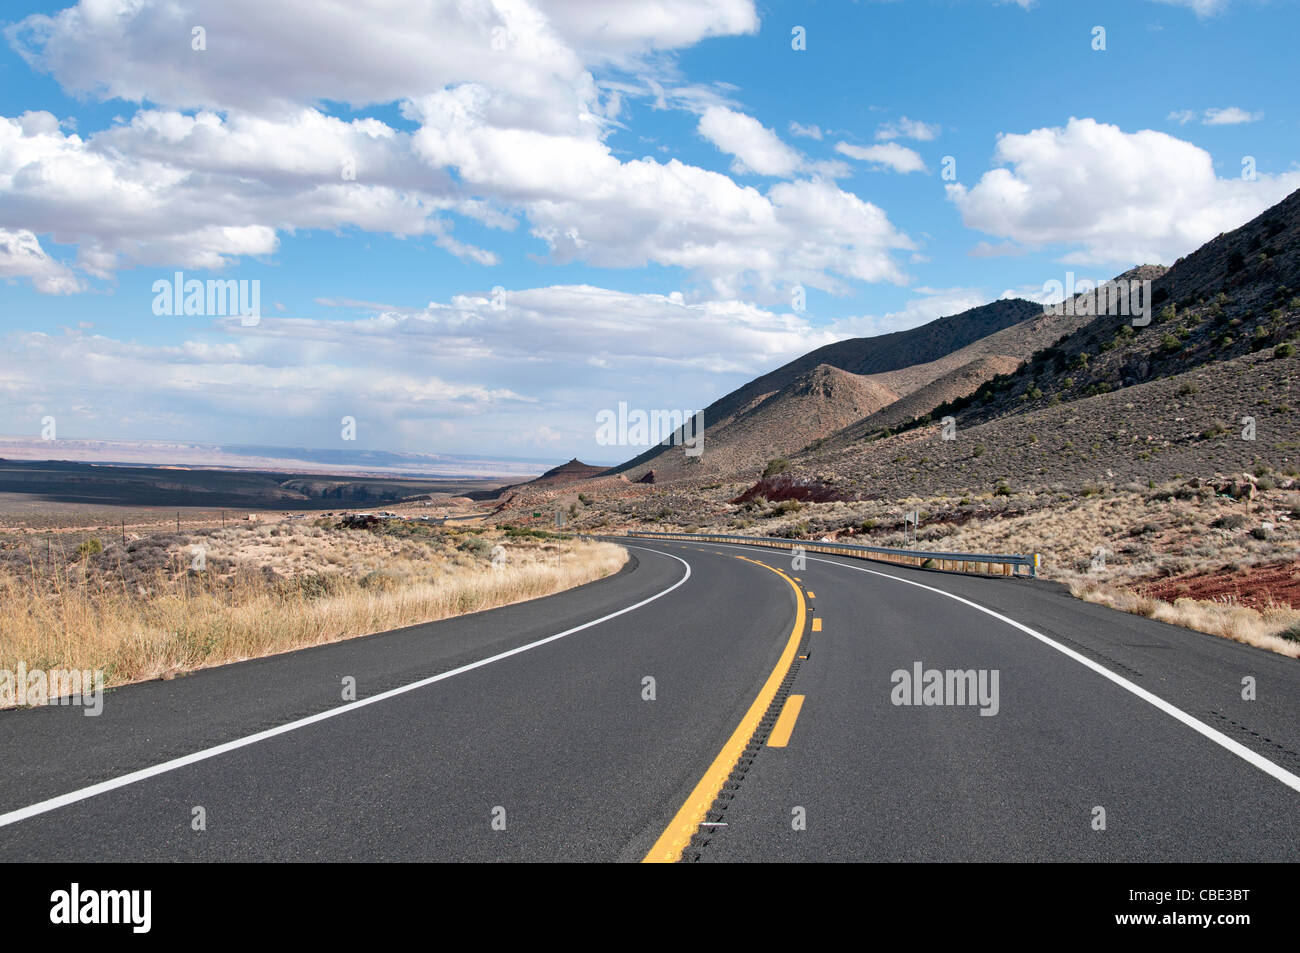 Scenic empty bending mountain road in the hills of Arizona United States Stock Photo